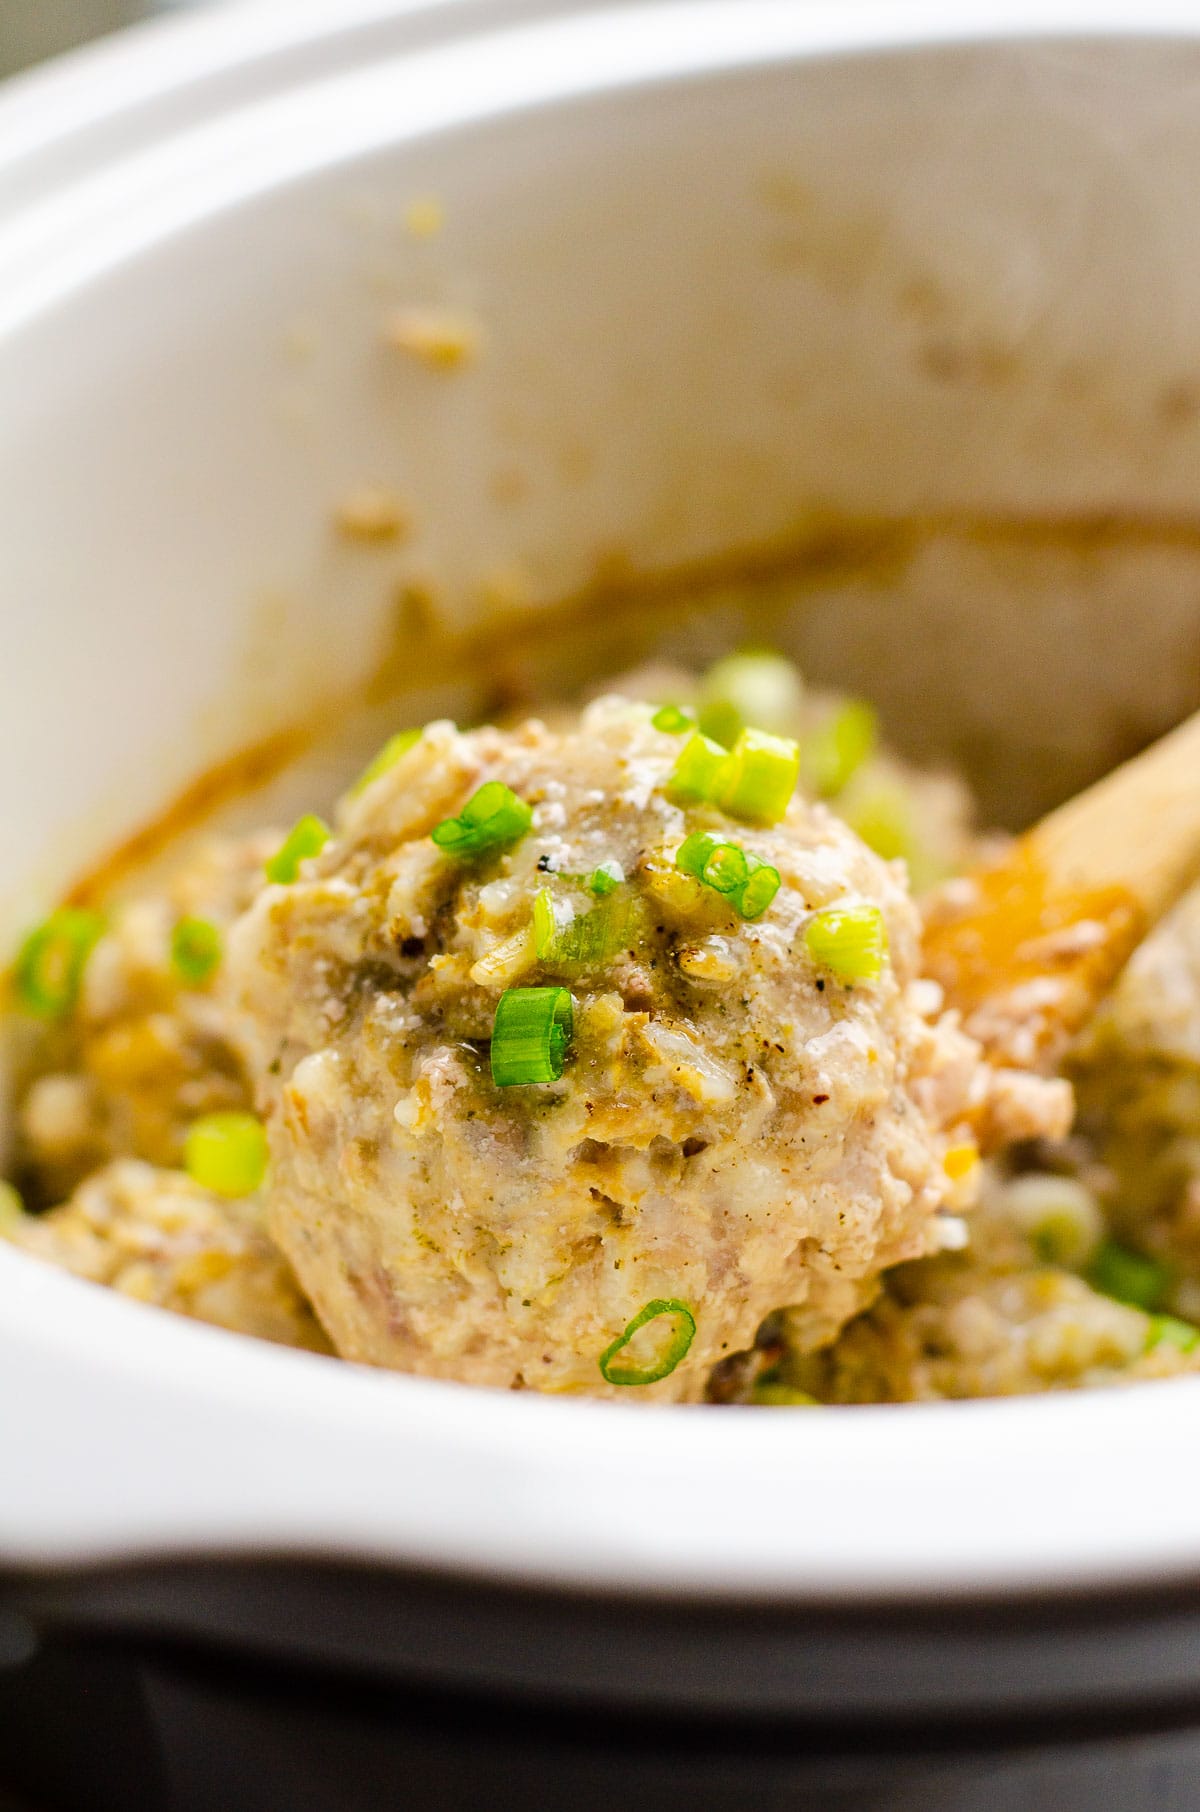 Porcupine meatball garnished with green onion on a spoon.